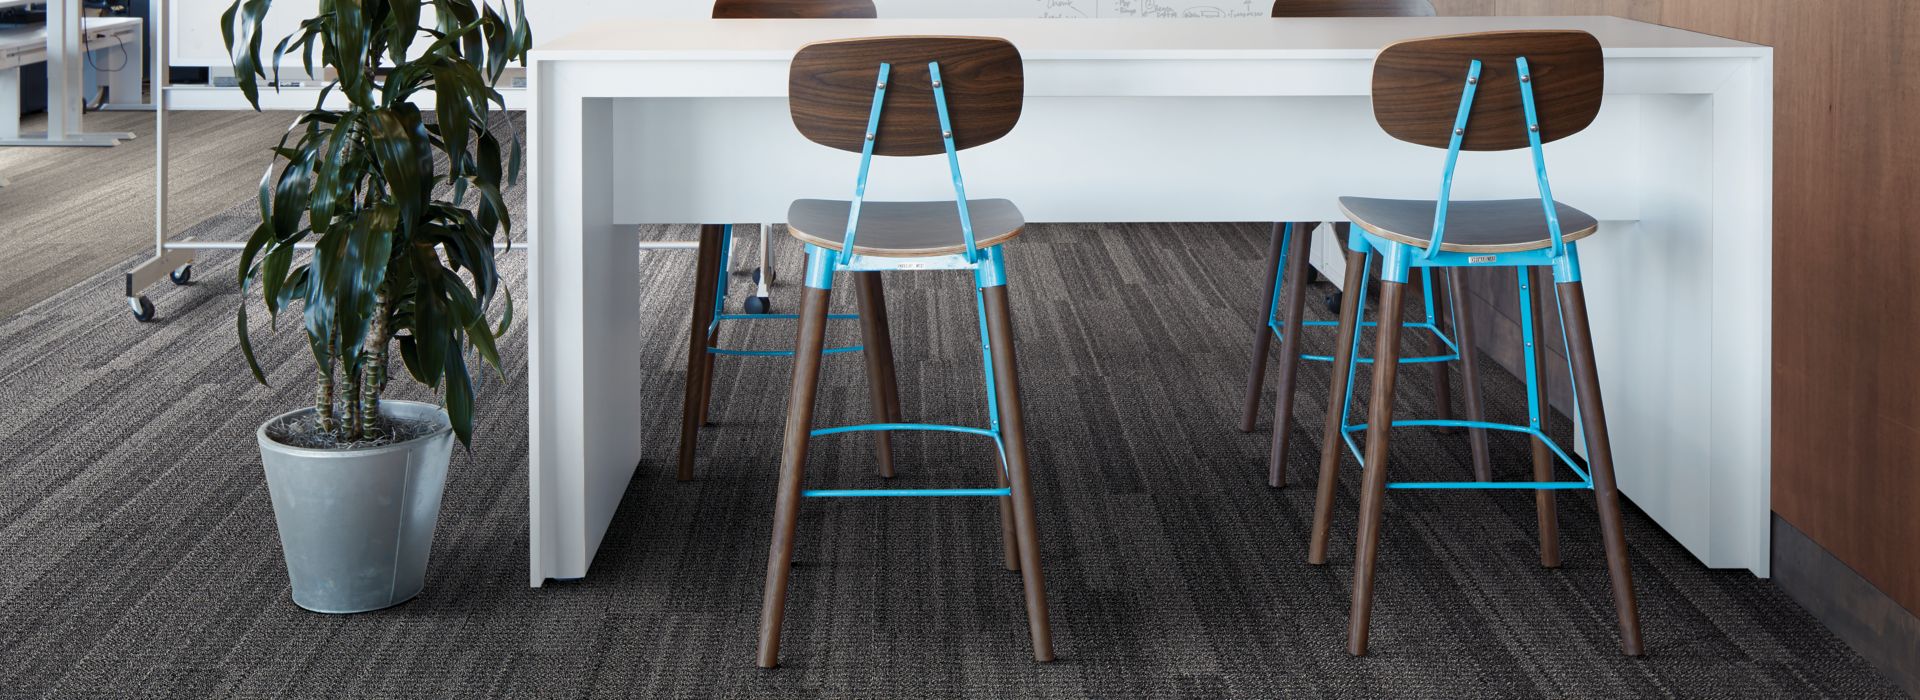 Interface Stitchery plank carpet tile seating area with high top tables and stools 